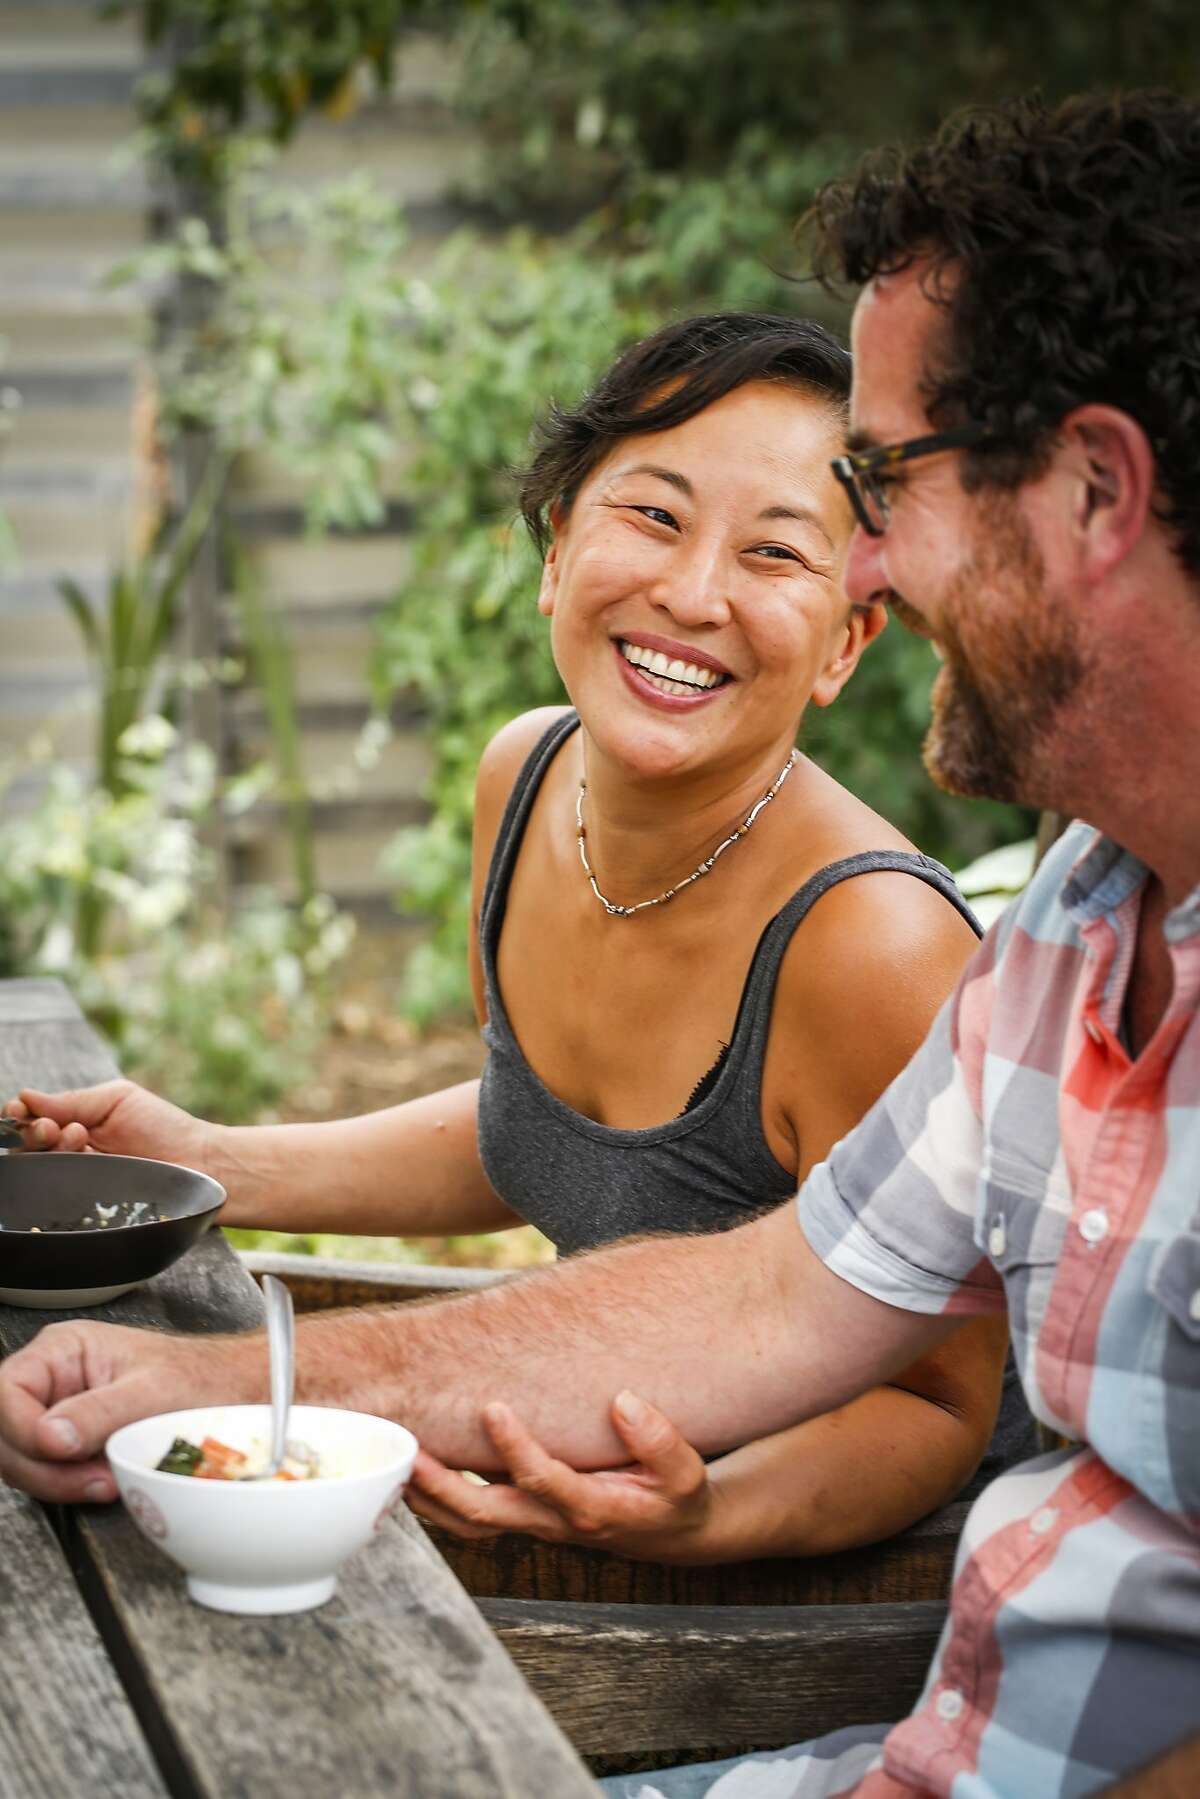 Julya Shin of Pizzaiolo and her partner, Corin Weihemuller, enjoy lunch in their garden at their home on Monday, July 20, 2015 in Oakland, Calif.